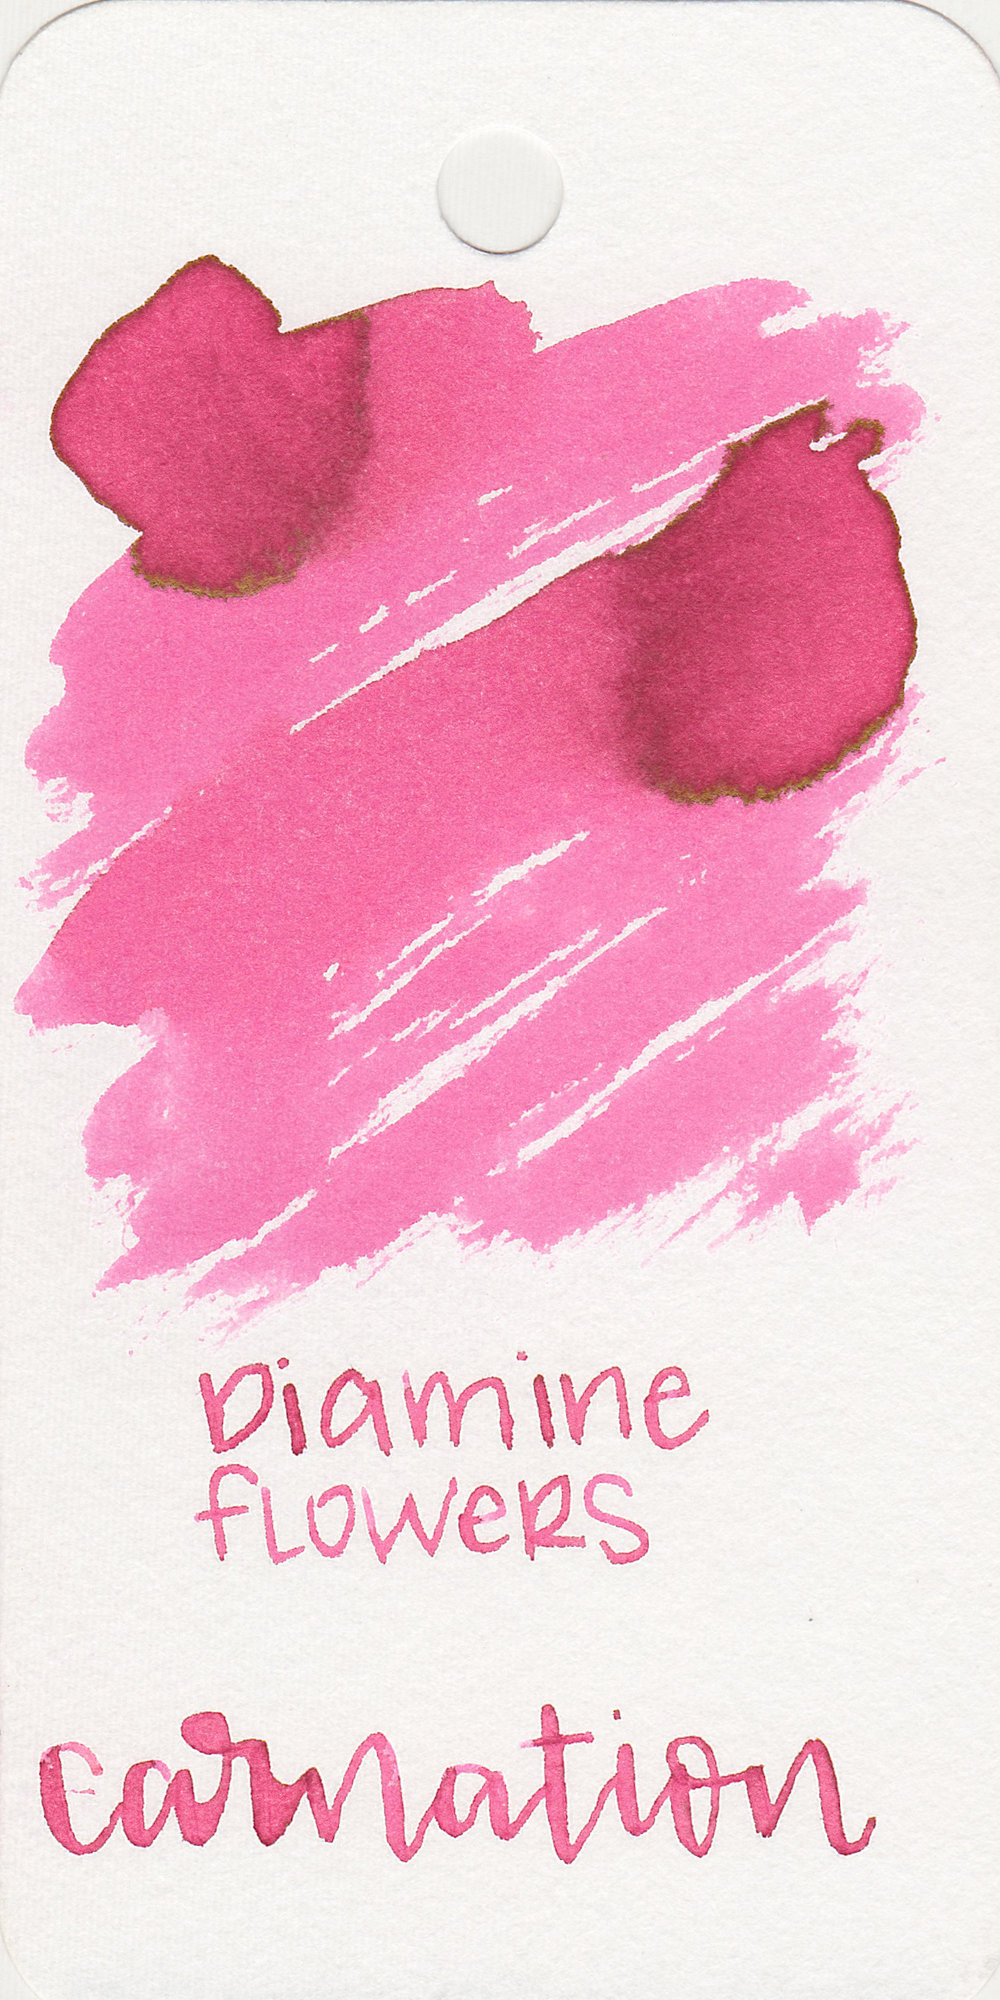 Ink Review #399: Diamine Flowers Carnation — Mountain of Ink